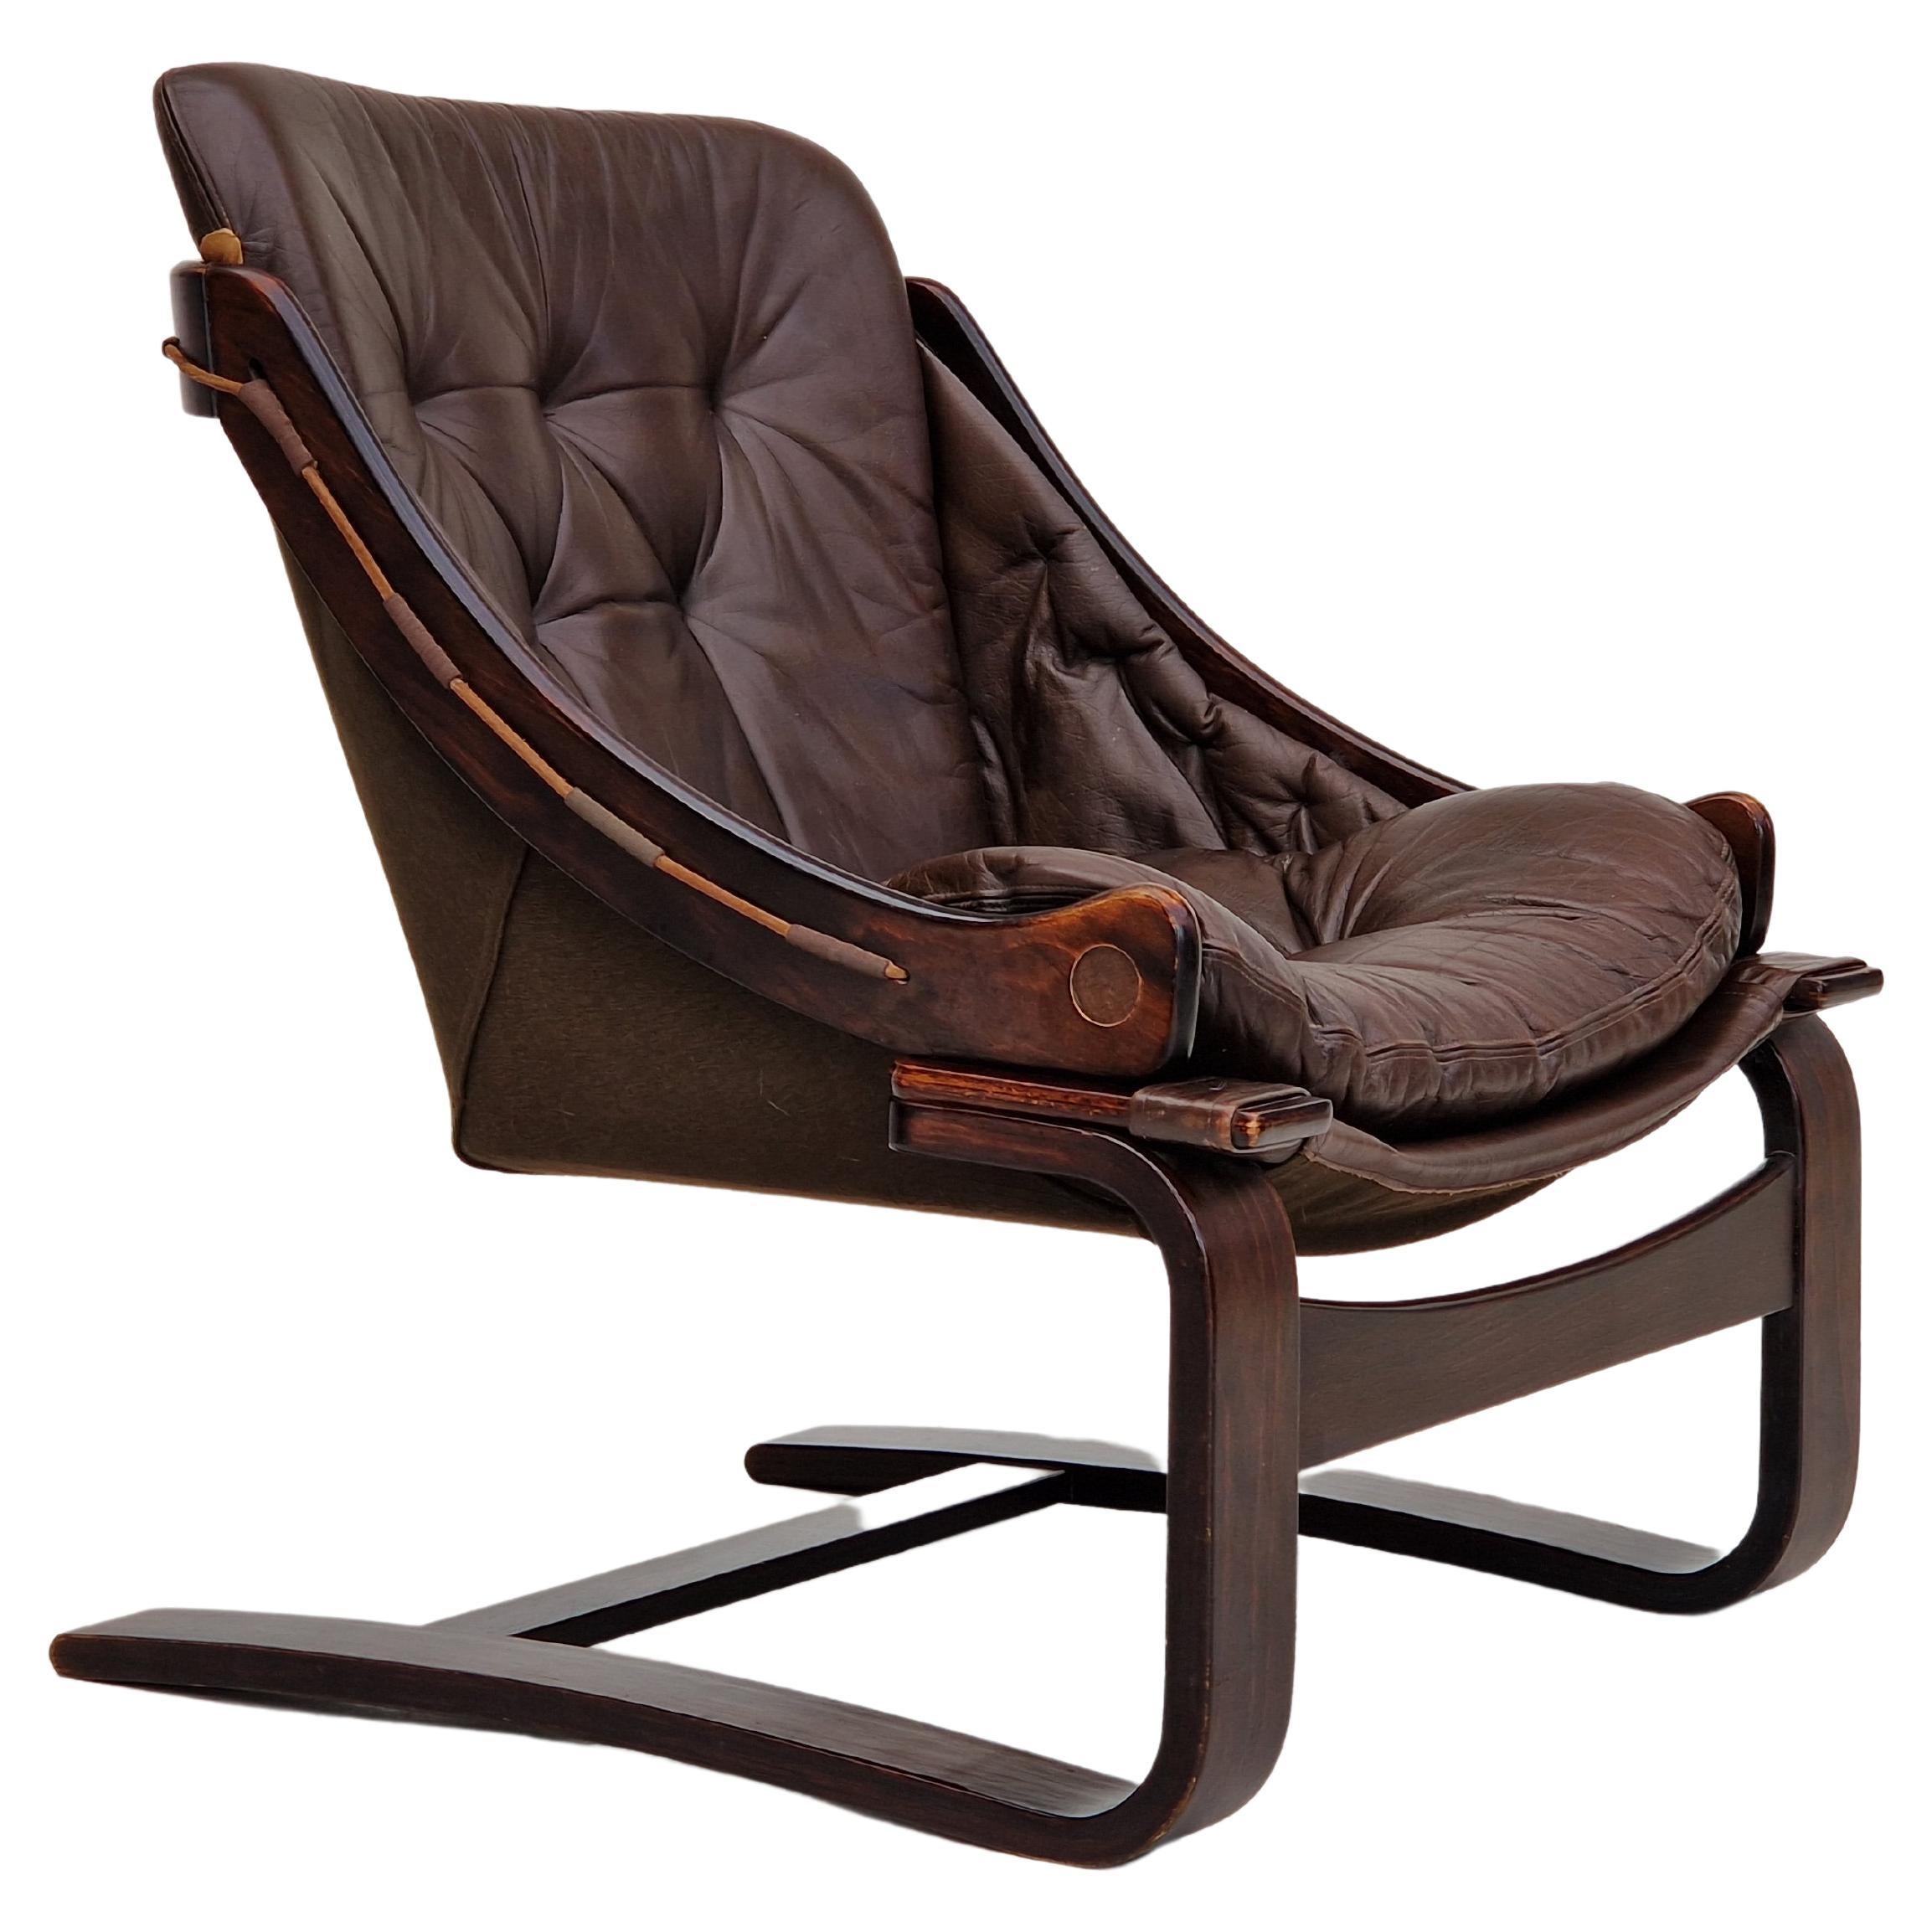 1970s, Brown Leather Lounge Chair by Ake Fribytter for Nelo Sweden